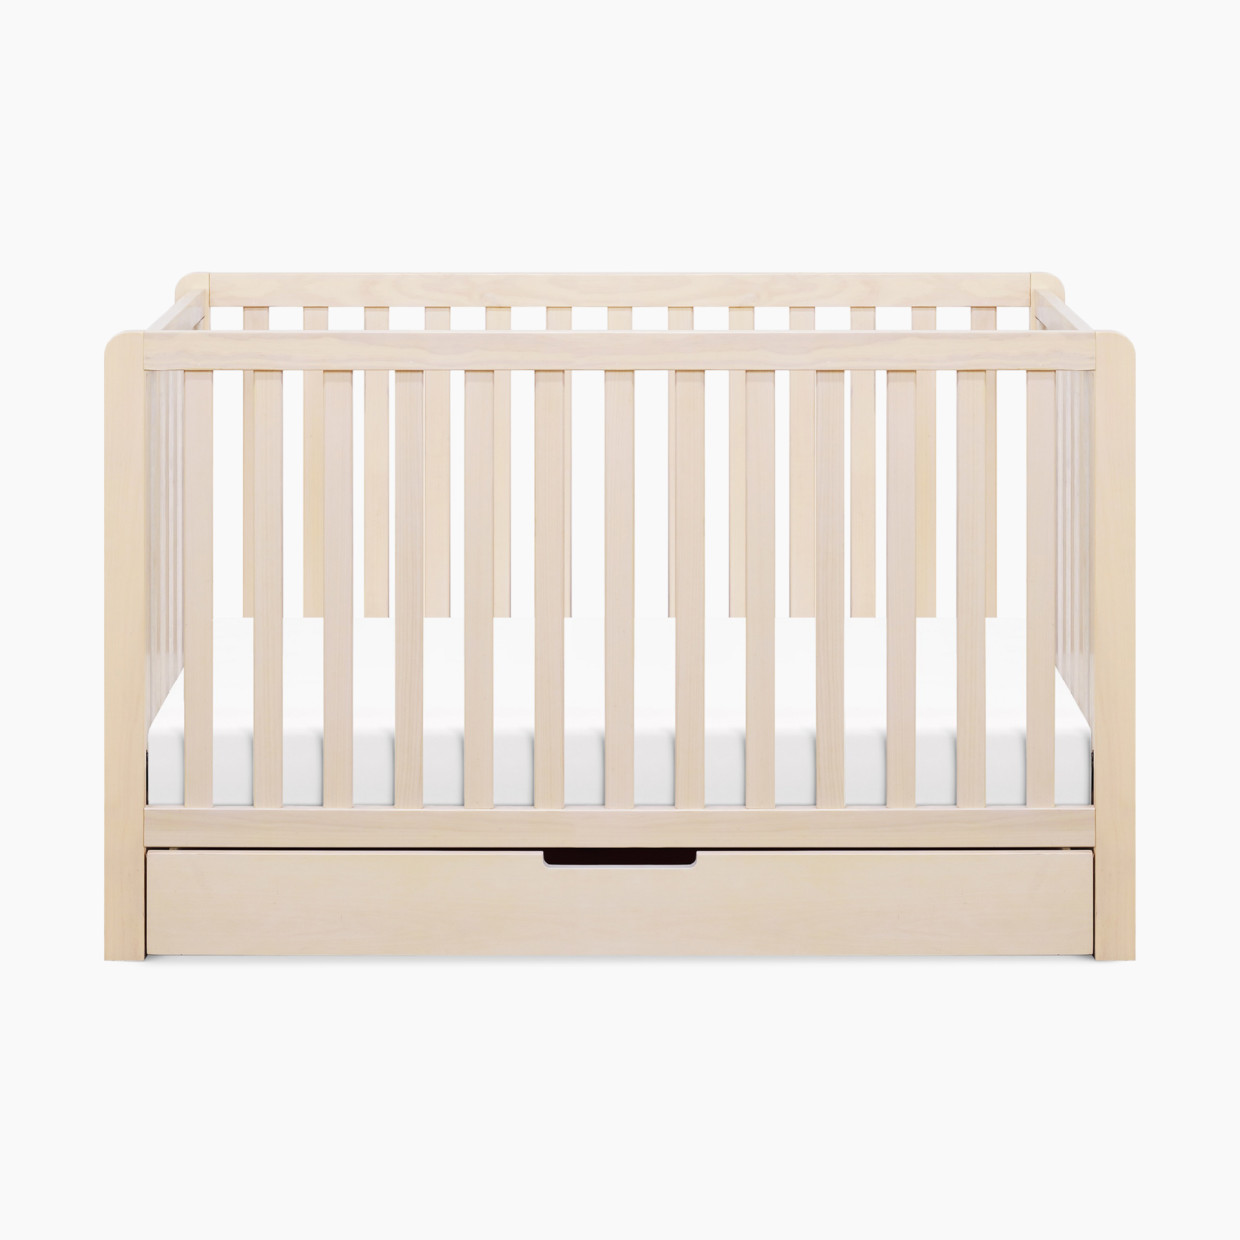 Carter's by DaVinci Colby 4-in-1 Convertible Crib with Trundle Drawer - Washed Natural.